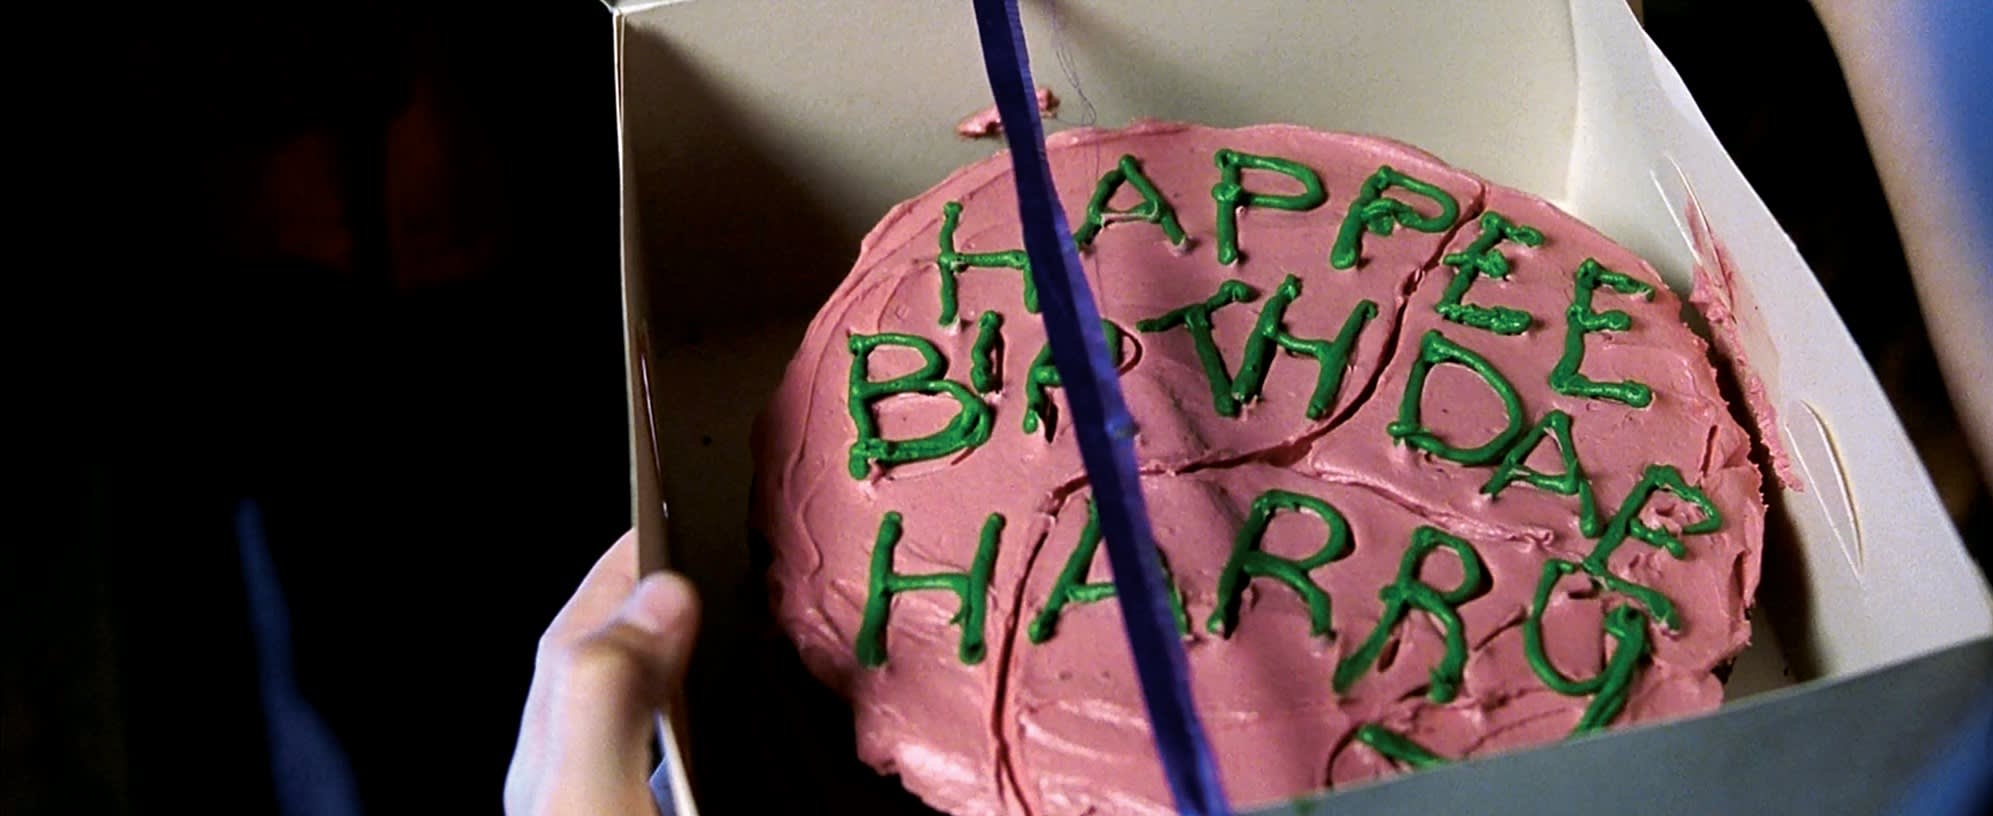 A close up image of Harry's pink birthday cake with green icing. 